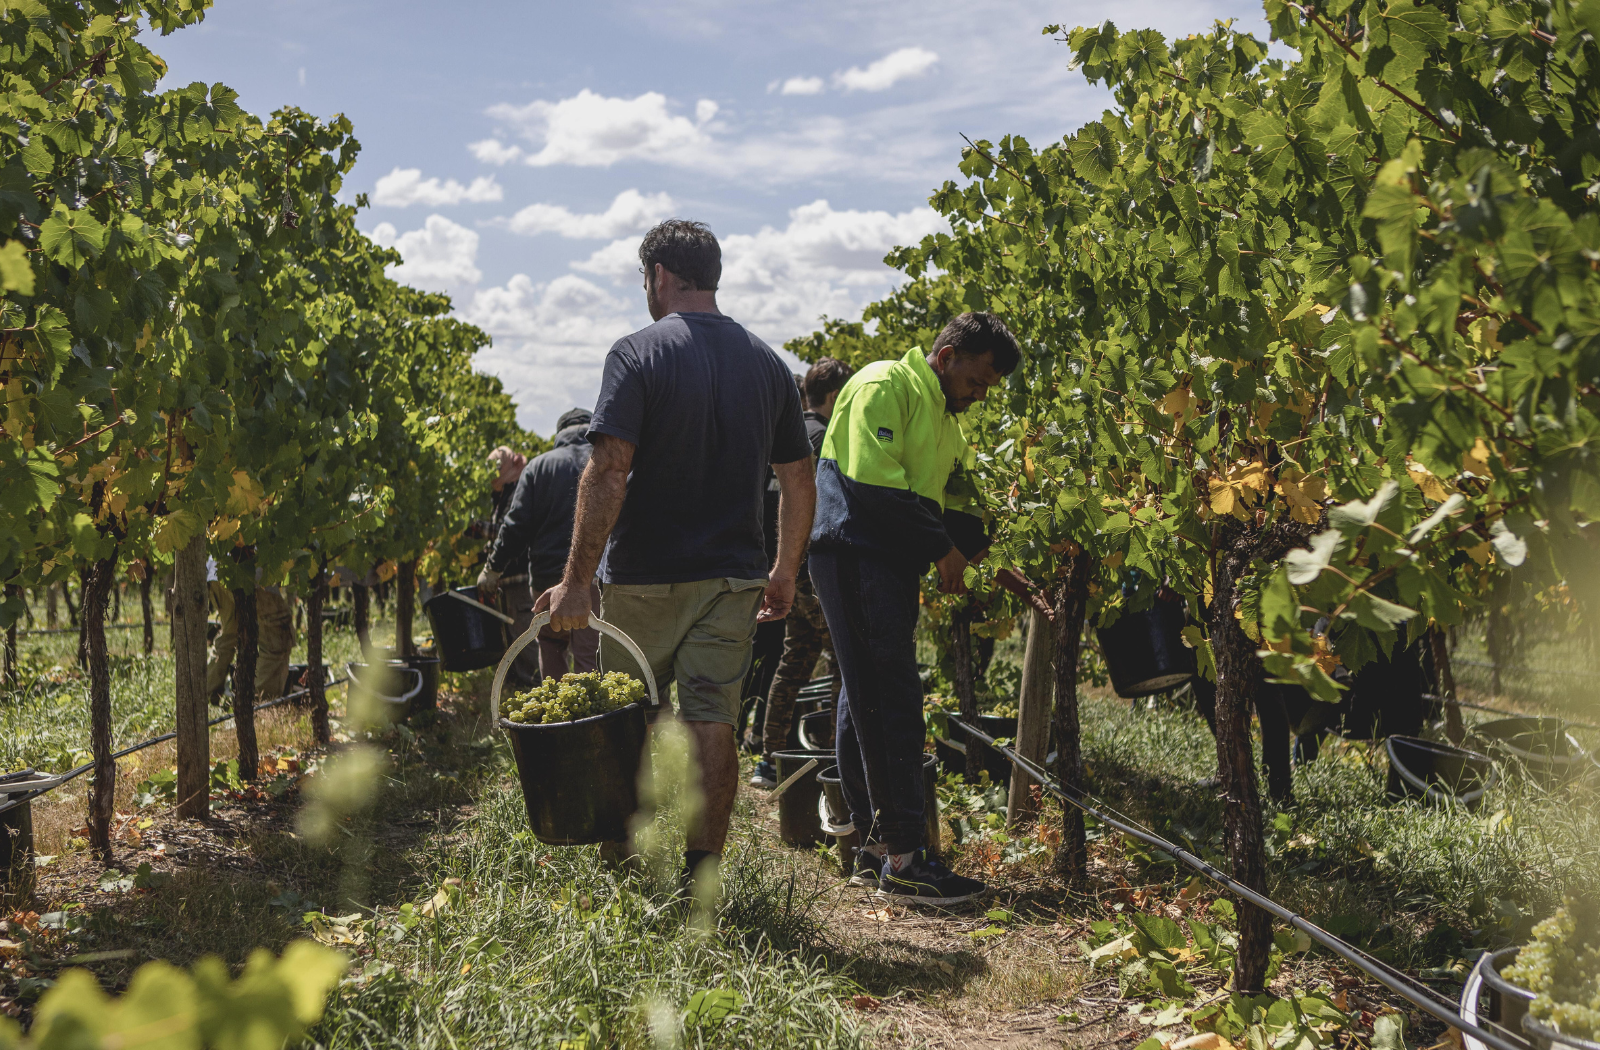 Winemaker and workers in the vineyards picking grapes